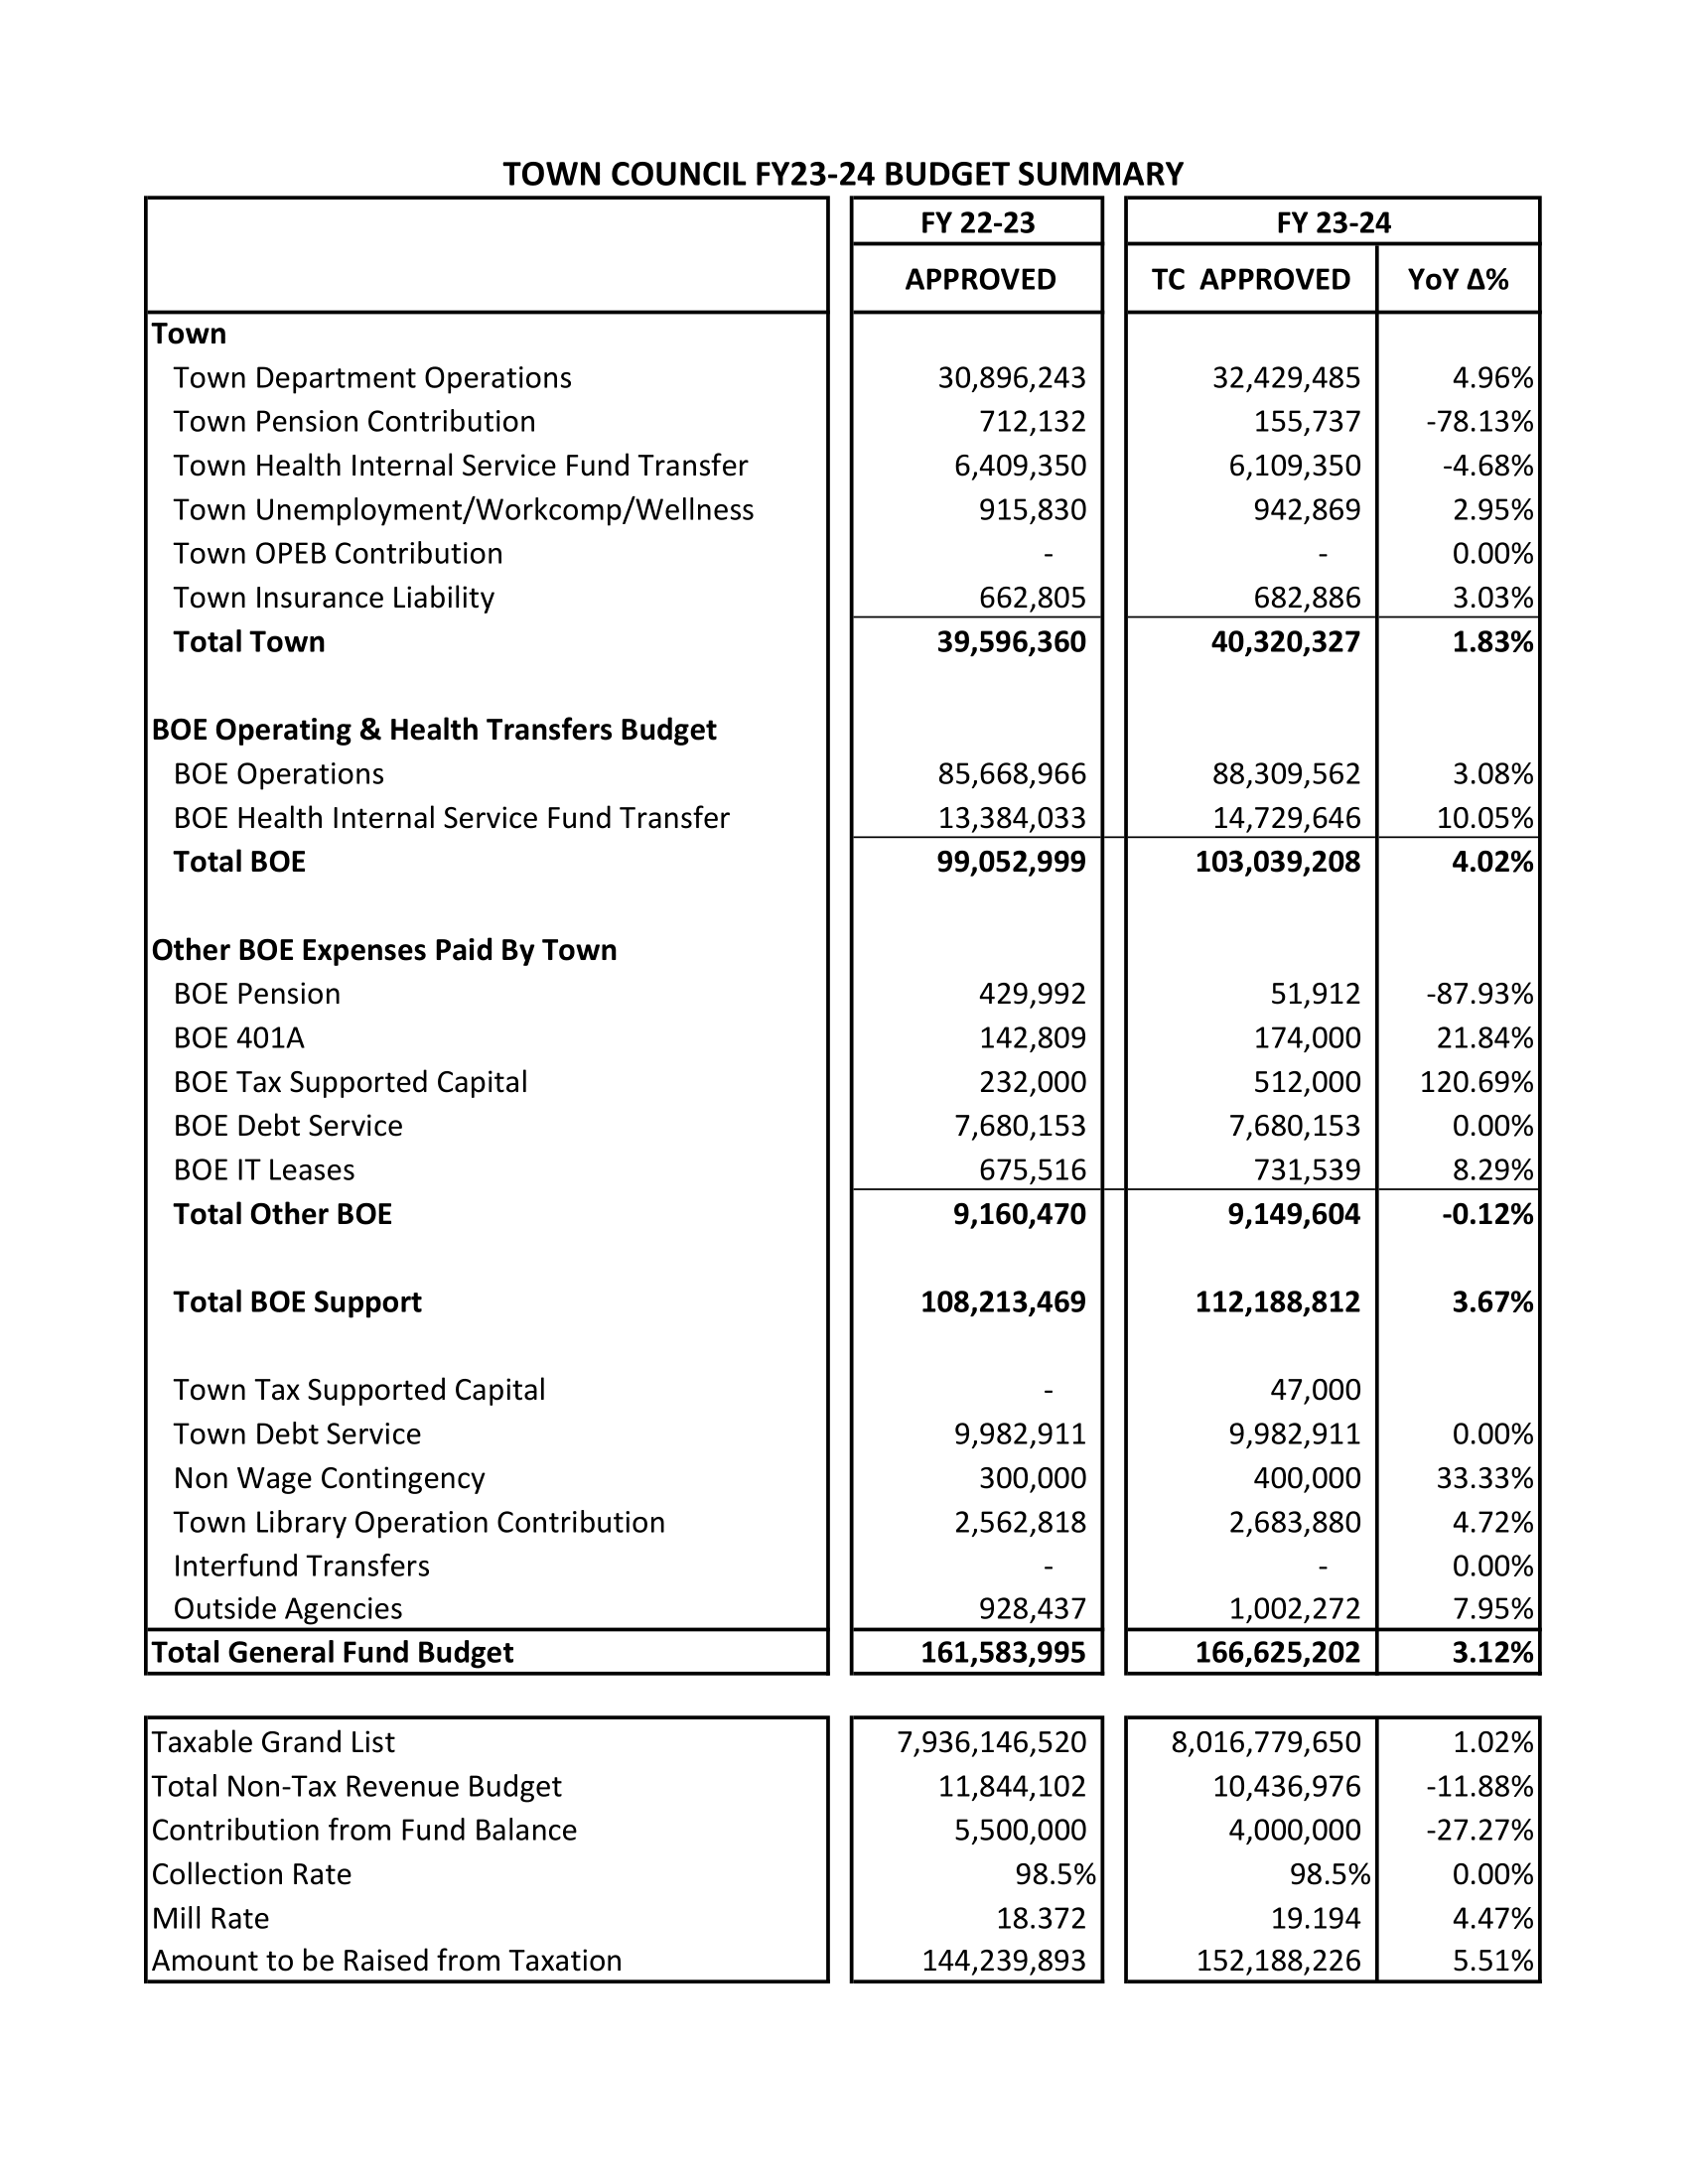 Town Council  FY23-24 Budget Summary-1